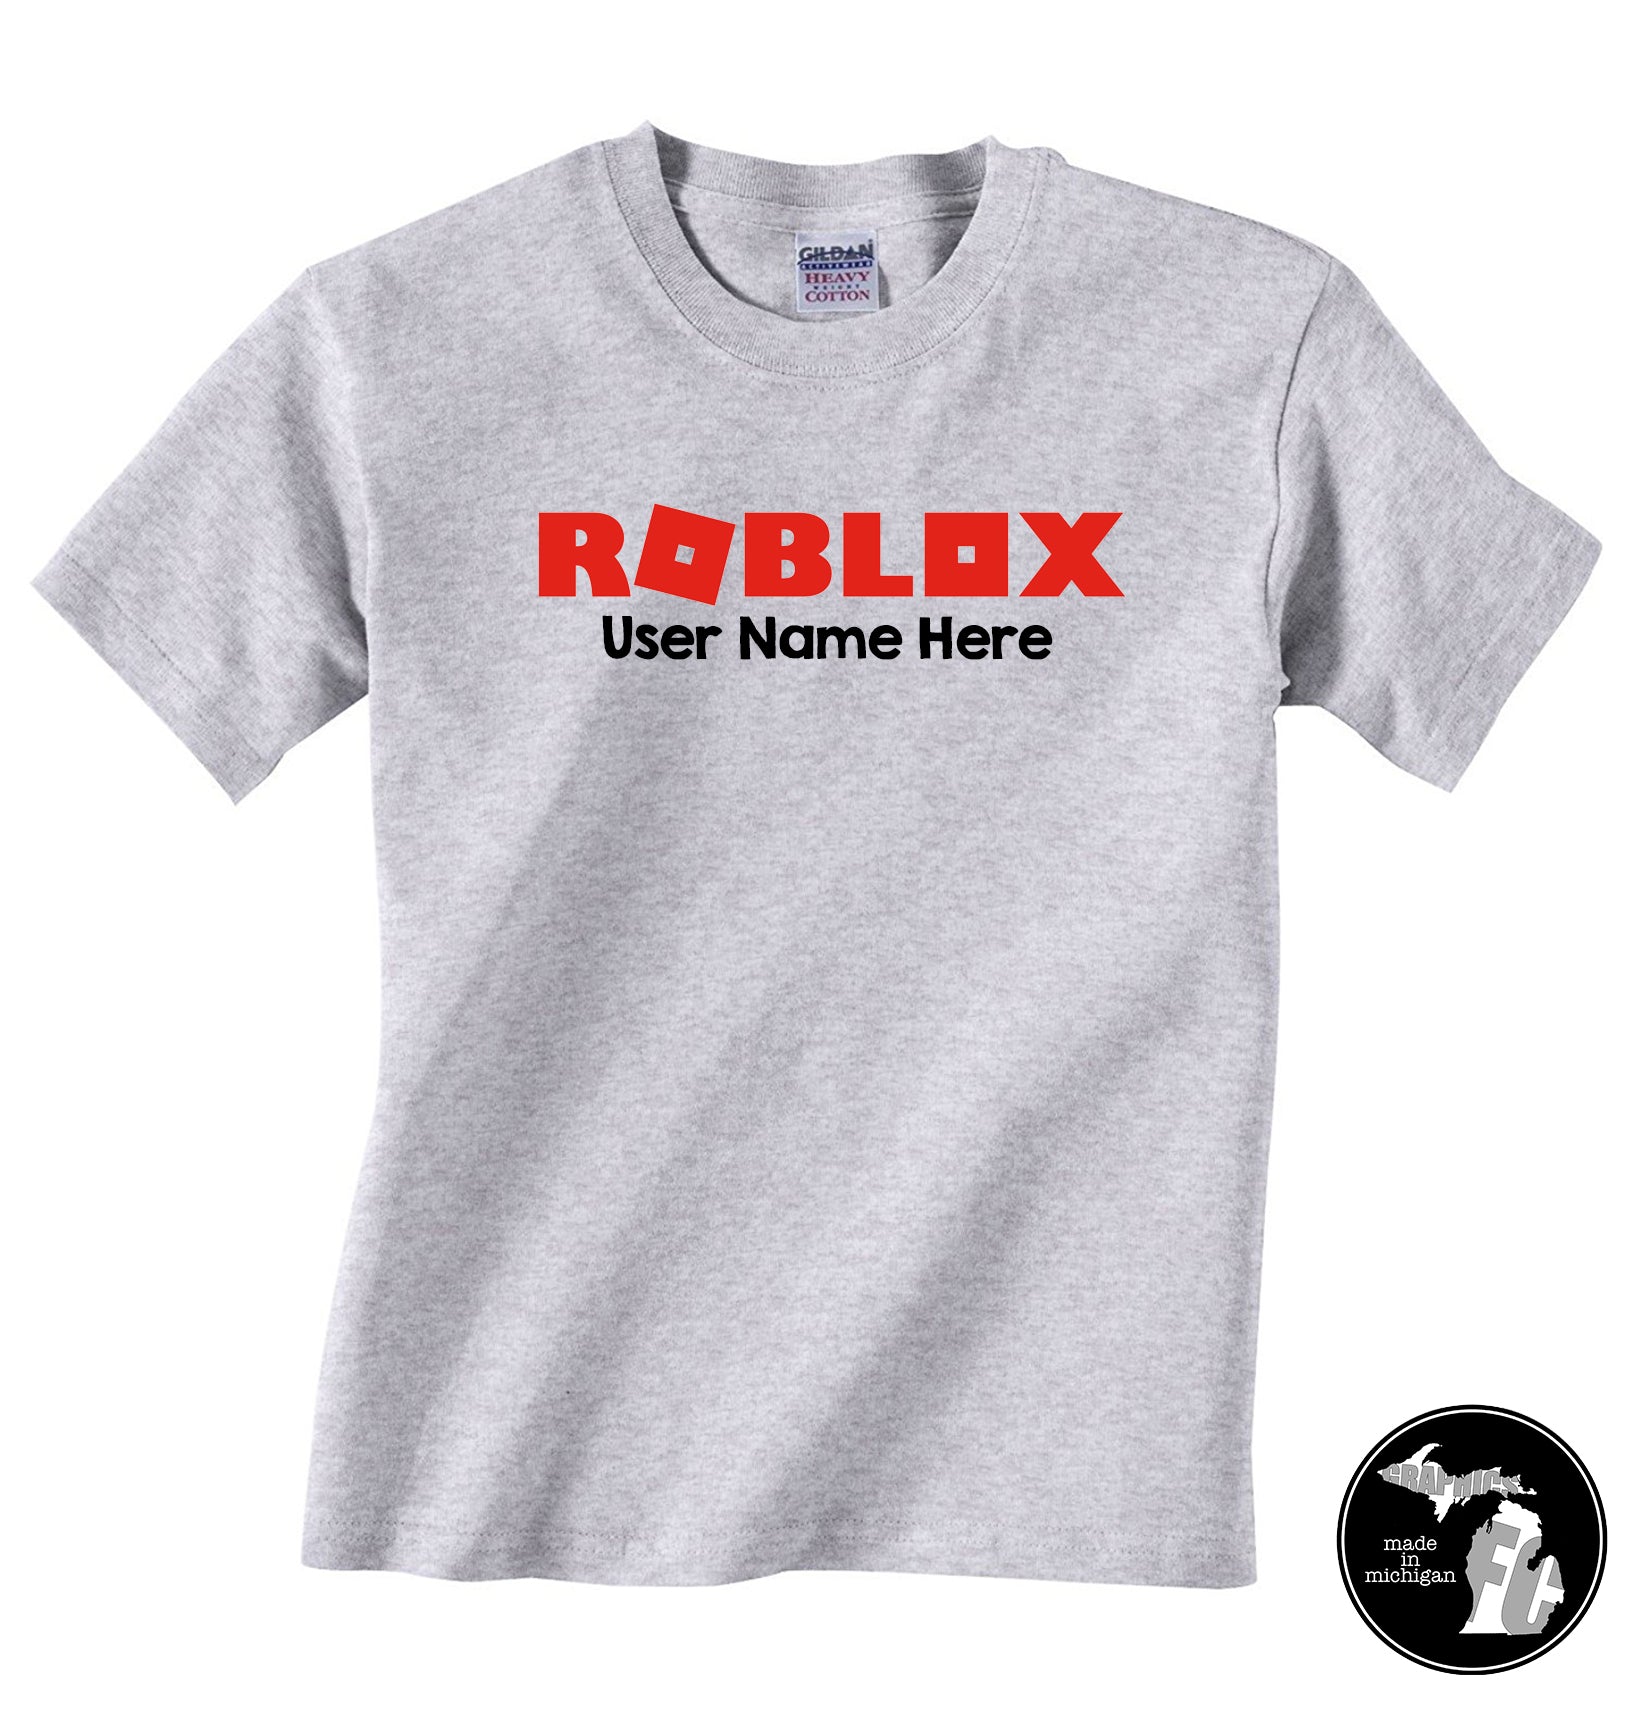 Roblox T Shirt With Personal User Name Kids Shirt Child Adults Furniture City Graphics - roblox shirts for kids